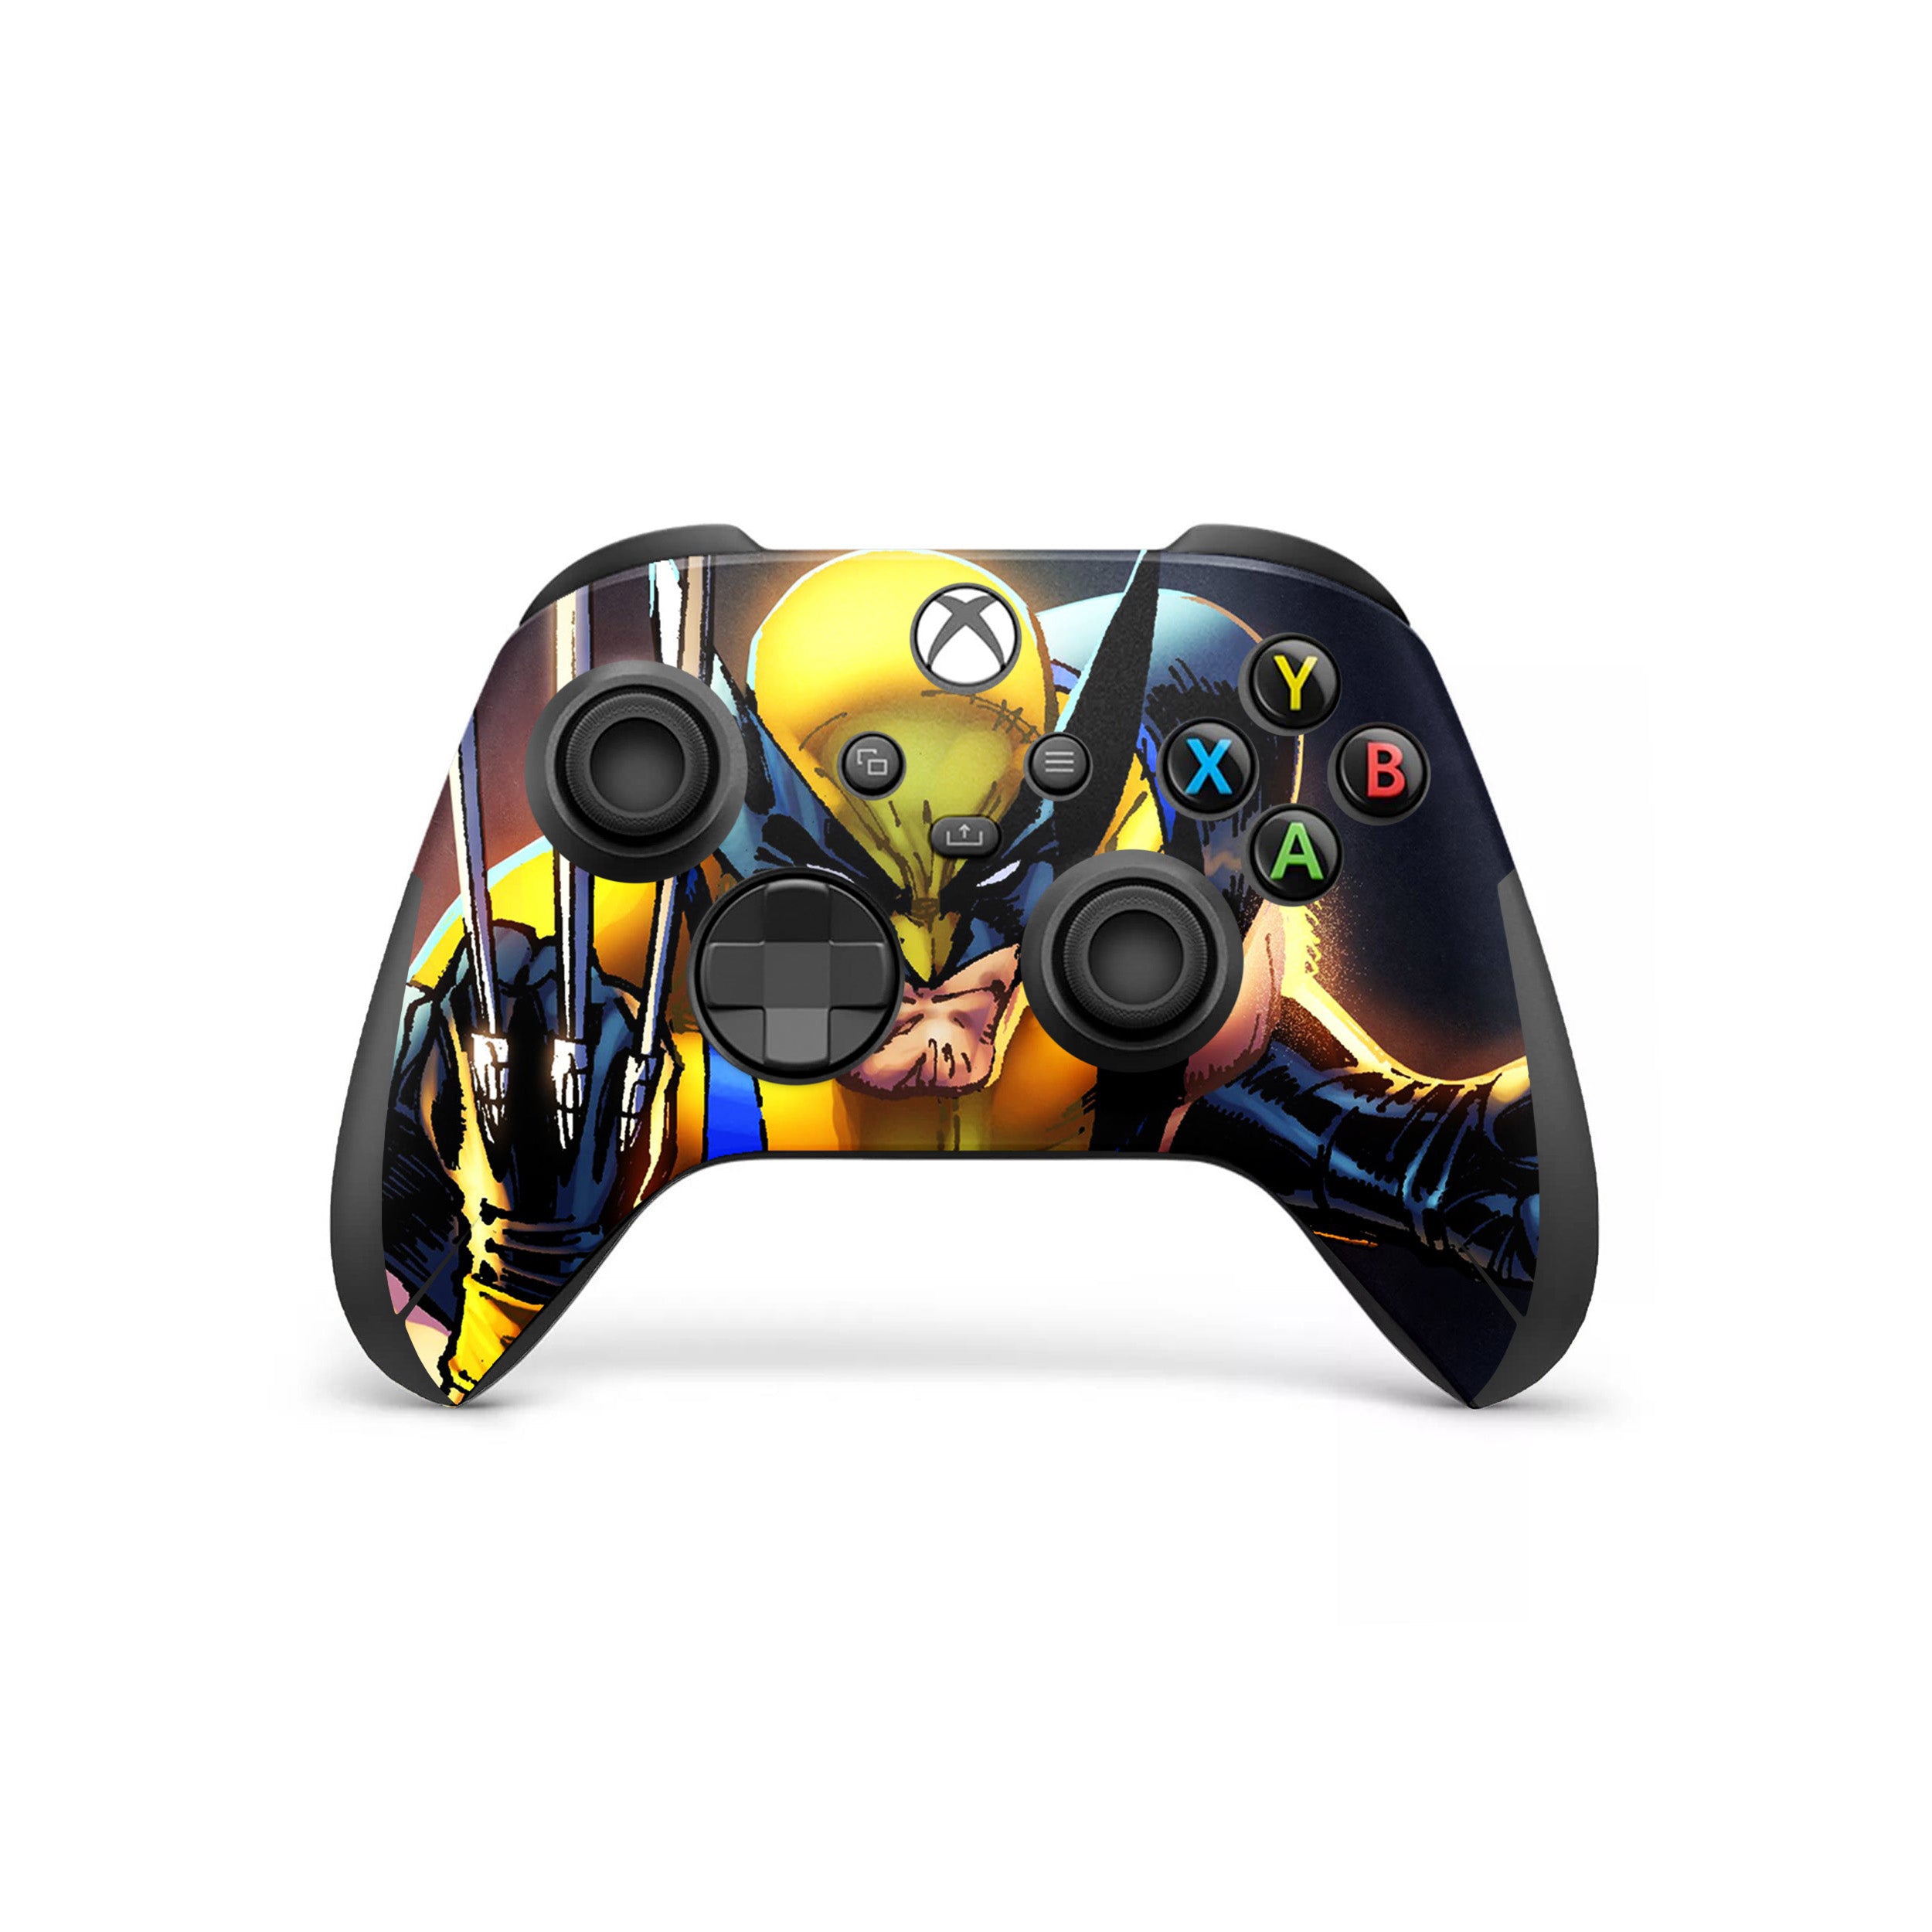 A video game skin featuring a Marvel X Men Wolverine design for the Xbox Wireless Controller.